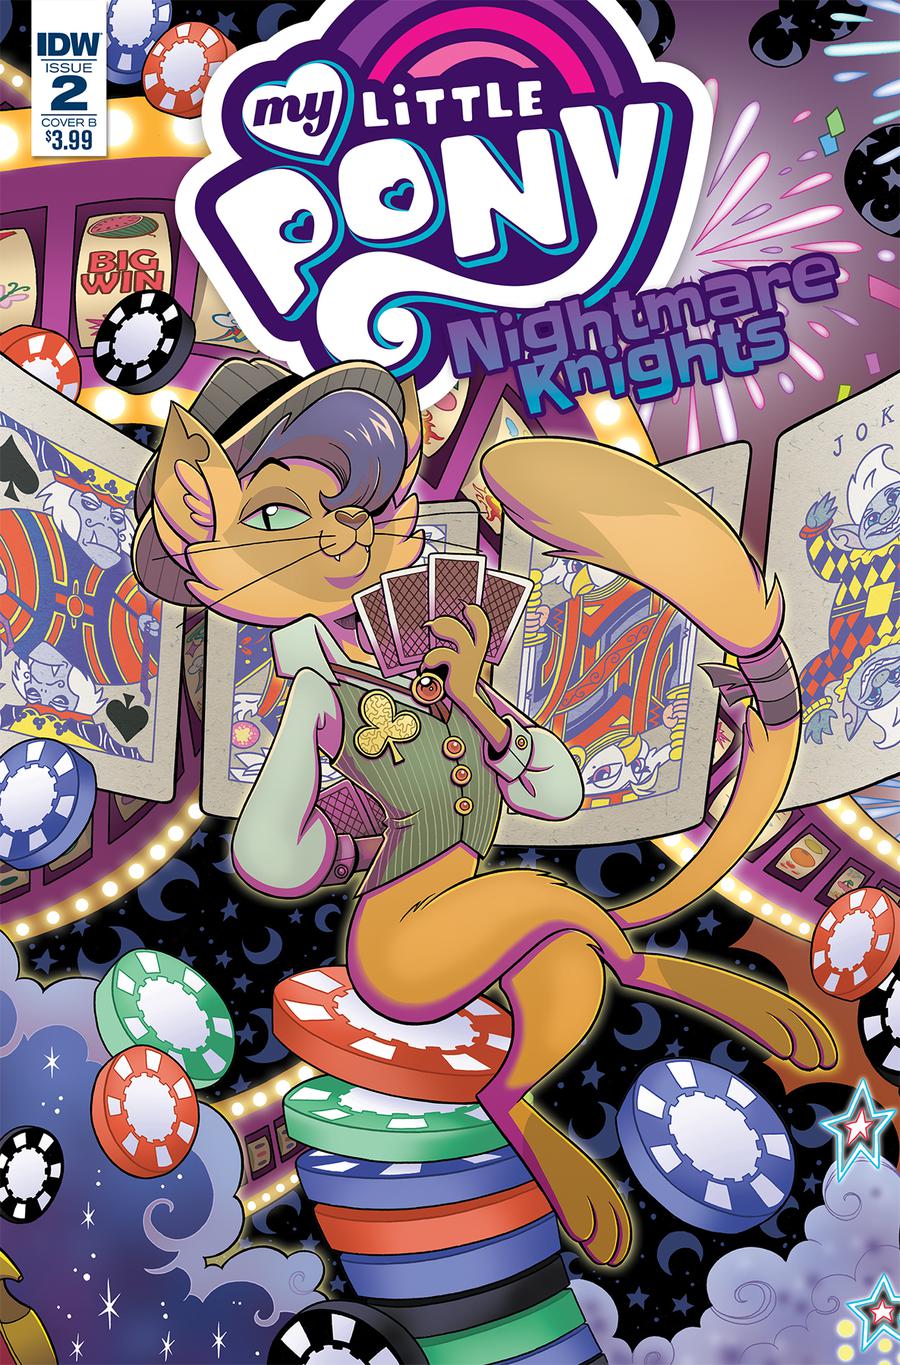 My Little Pony Nightmare Knights #2 Cover B Variant Brenda Hickey Cover